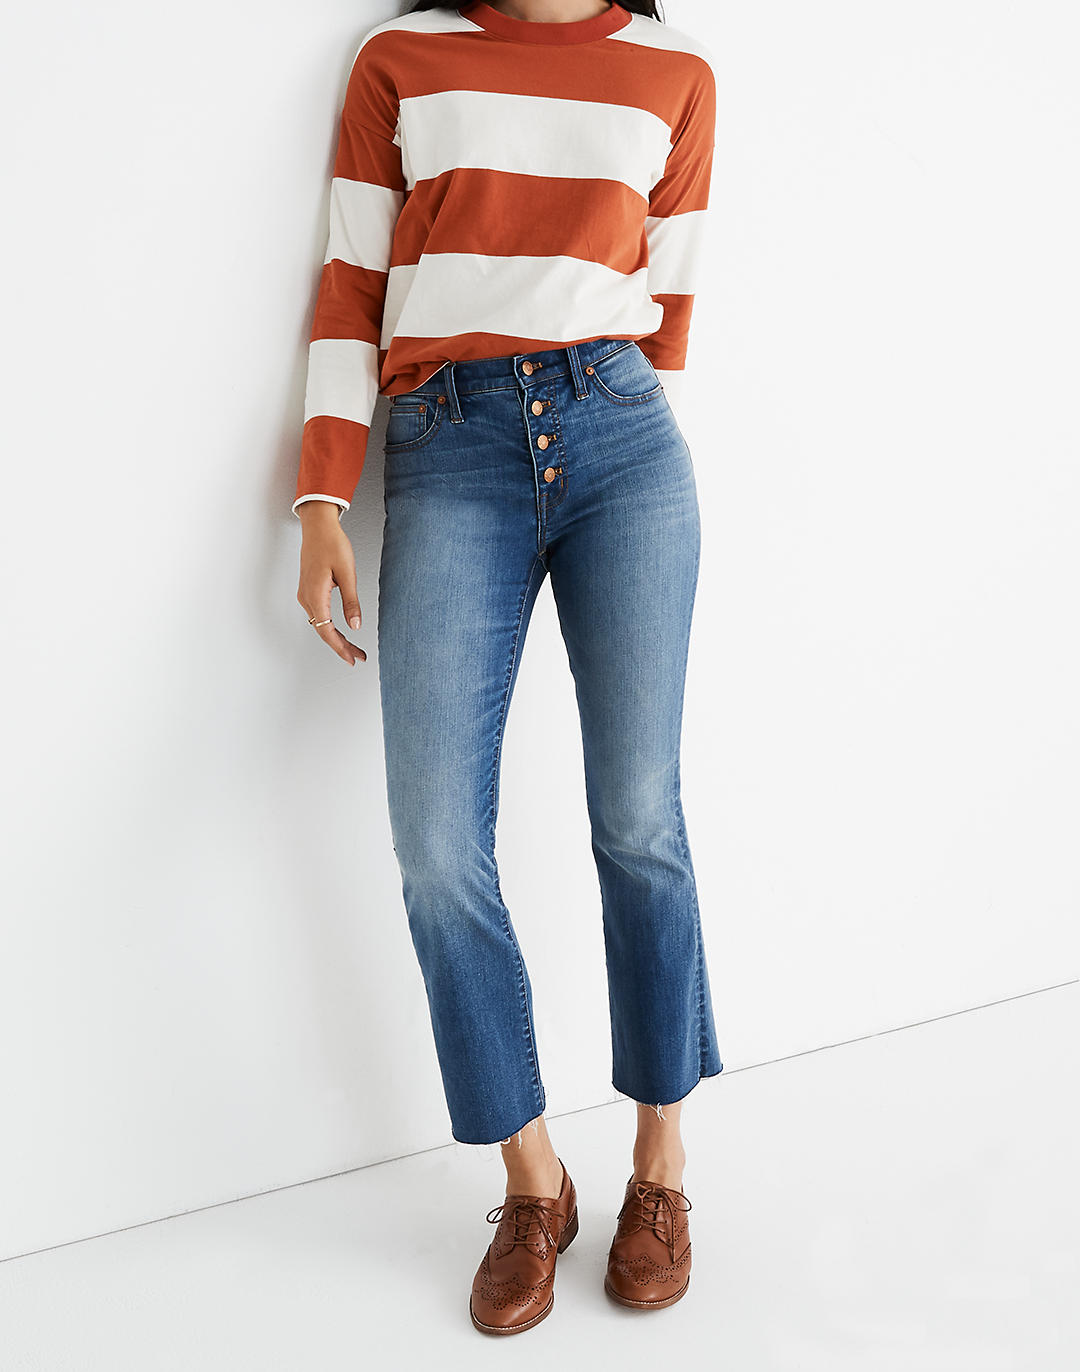 Petite Cali Demi-Boot Jeans in Daly Wash: Button-Front Edition